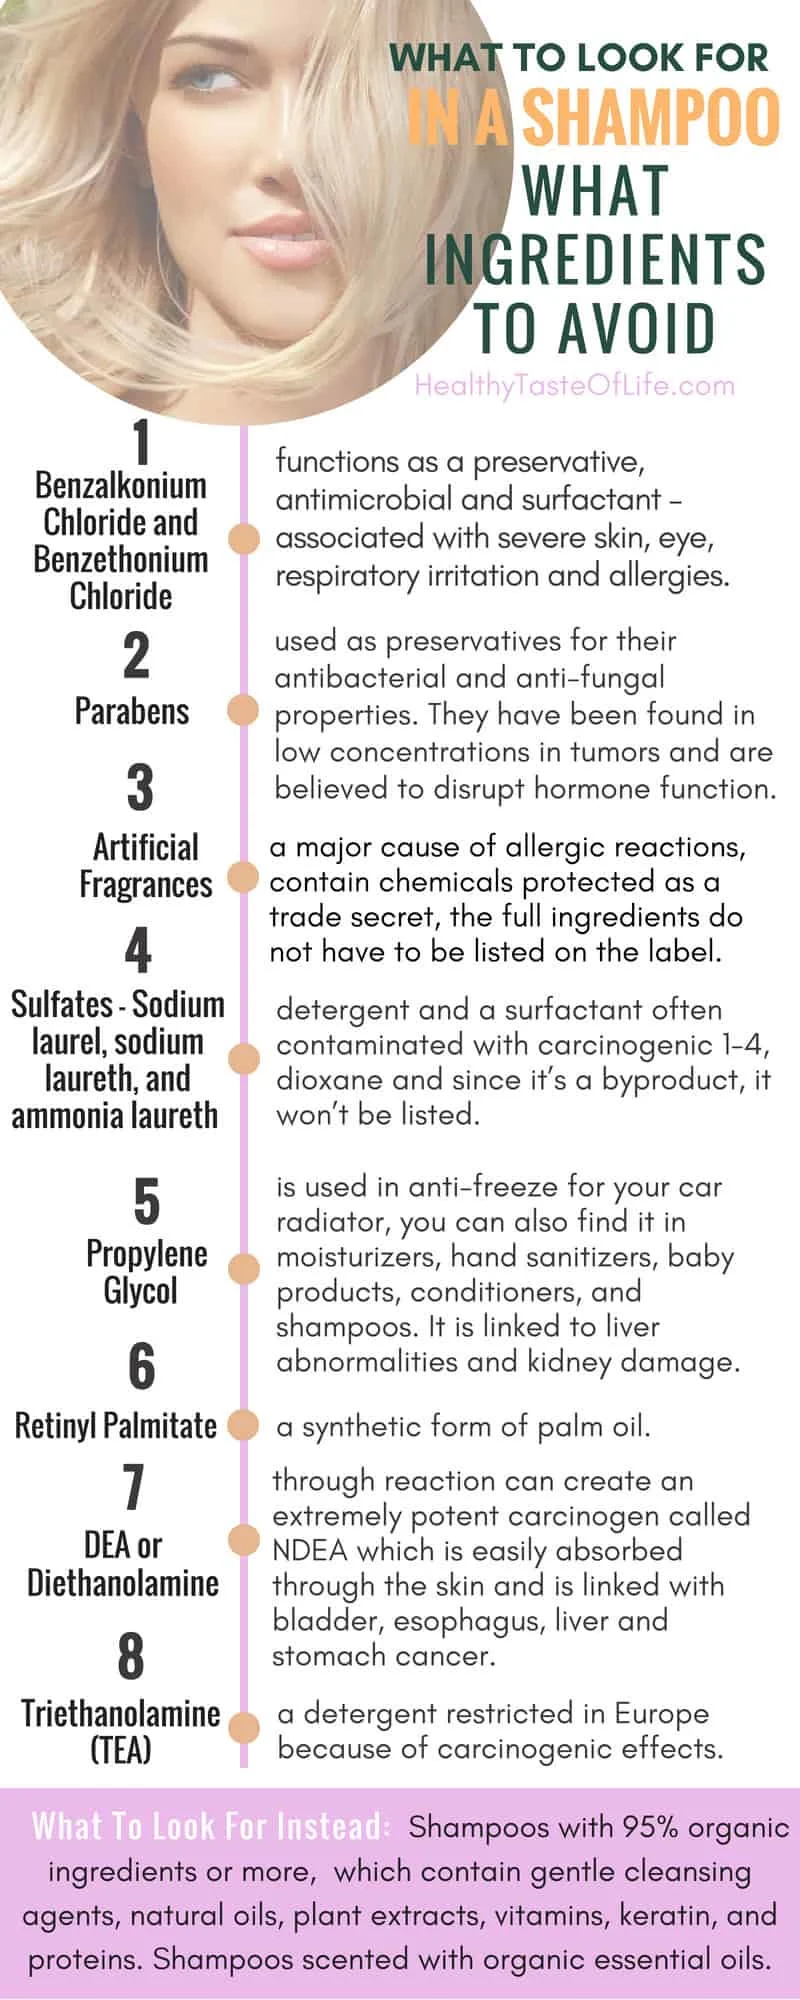 What Ingredients To Avoid in a shampoo